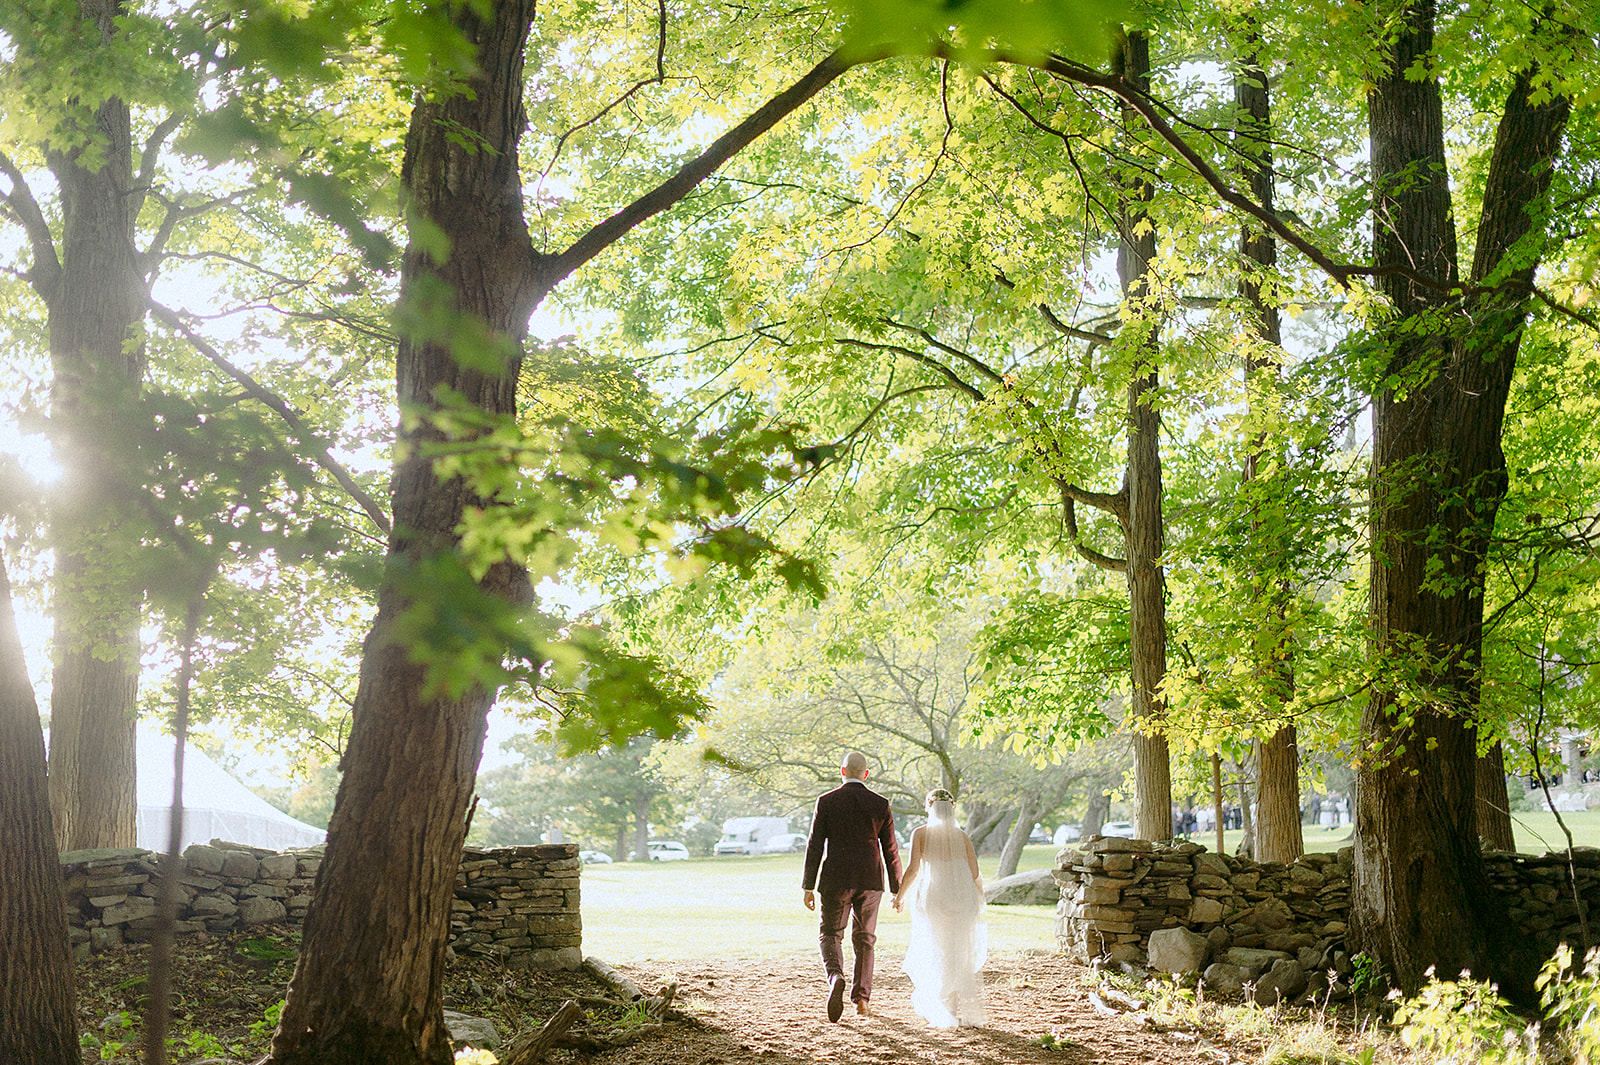 Sun filtering through the trees as bride and groom walk away at the Carey Institute for Global Good